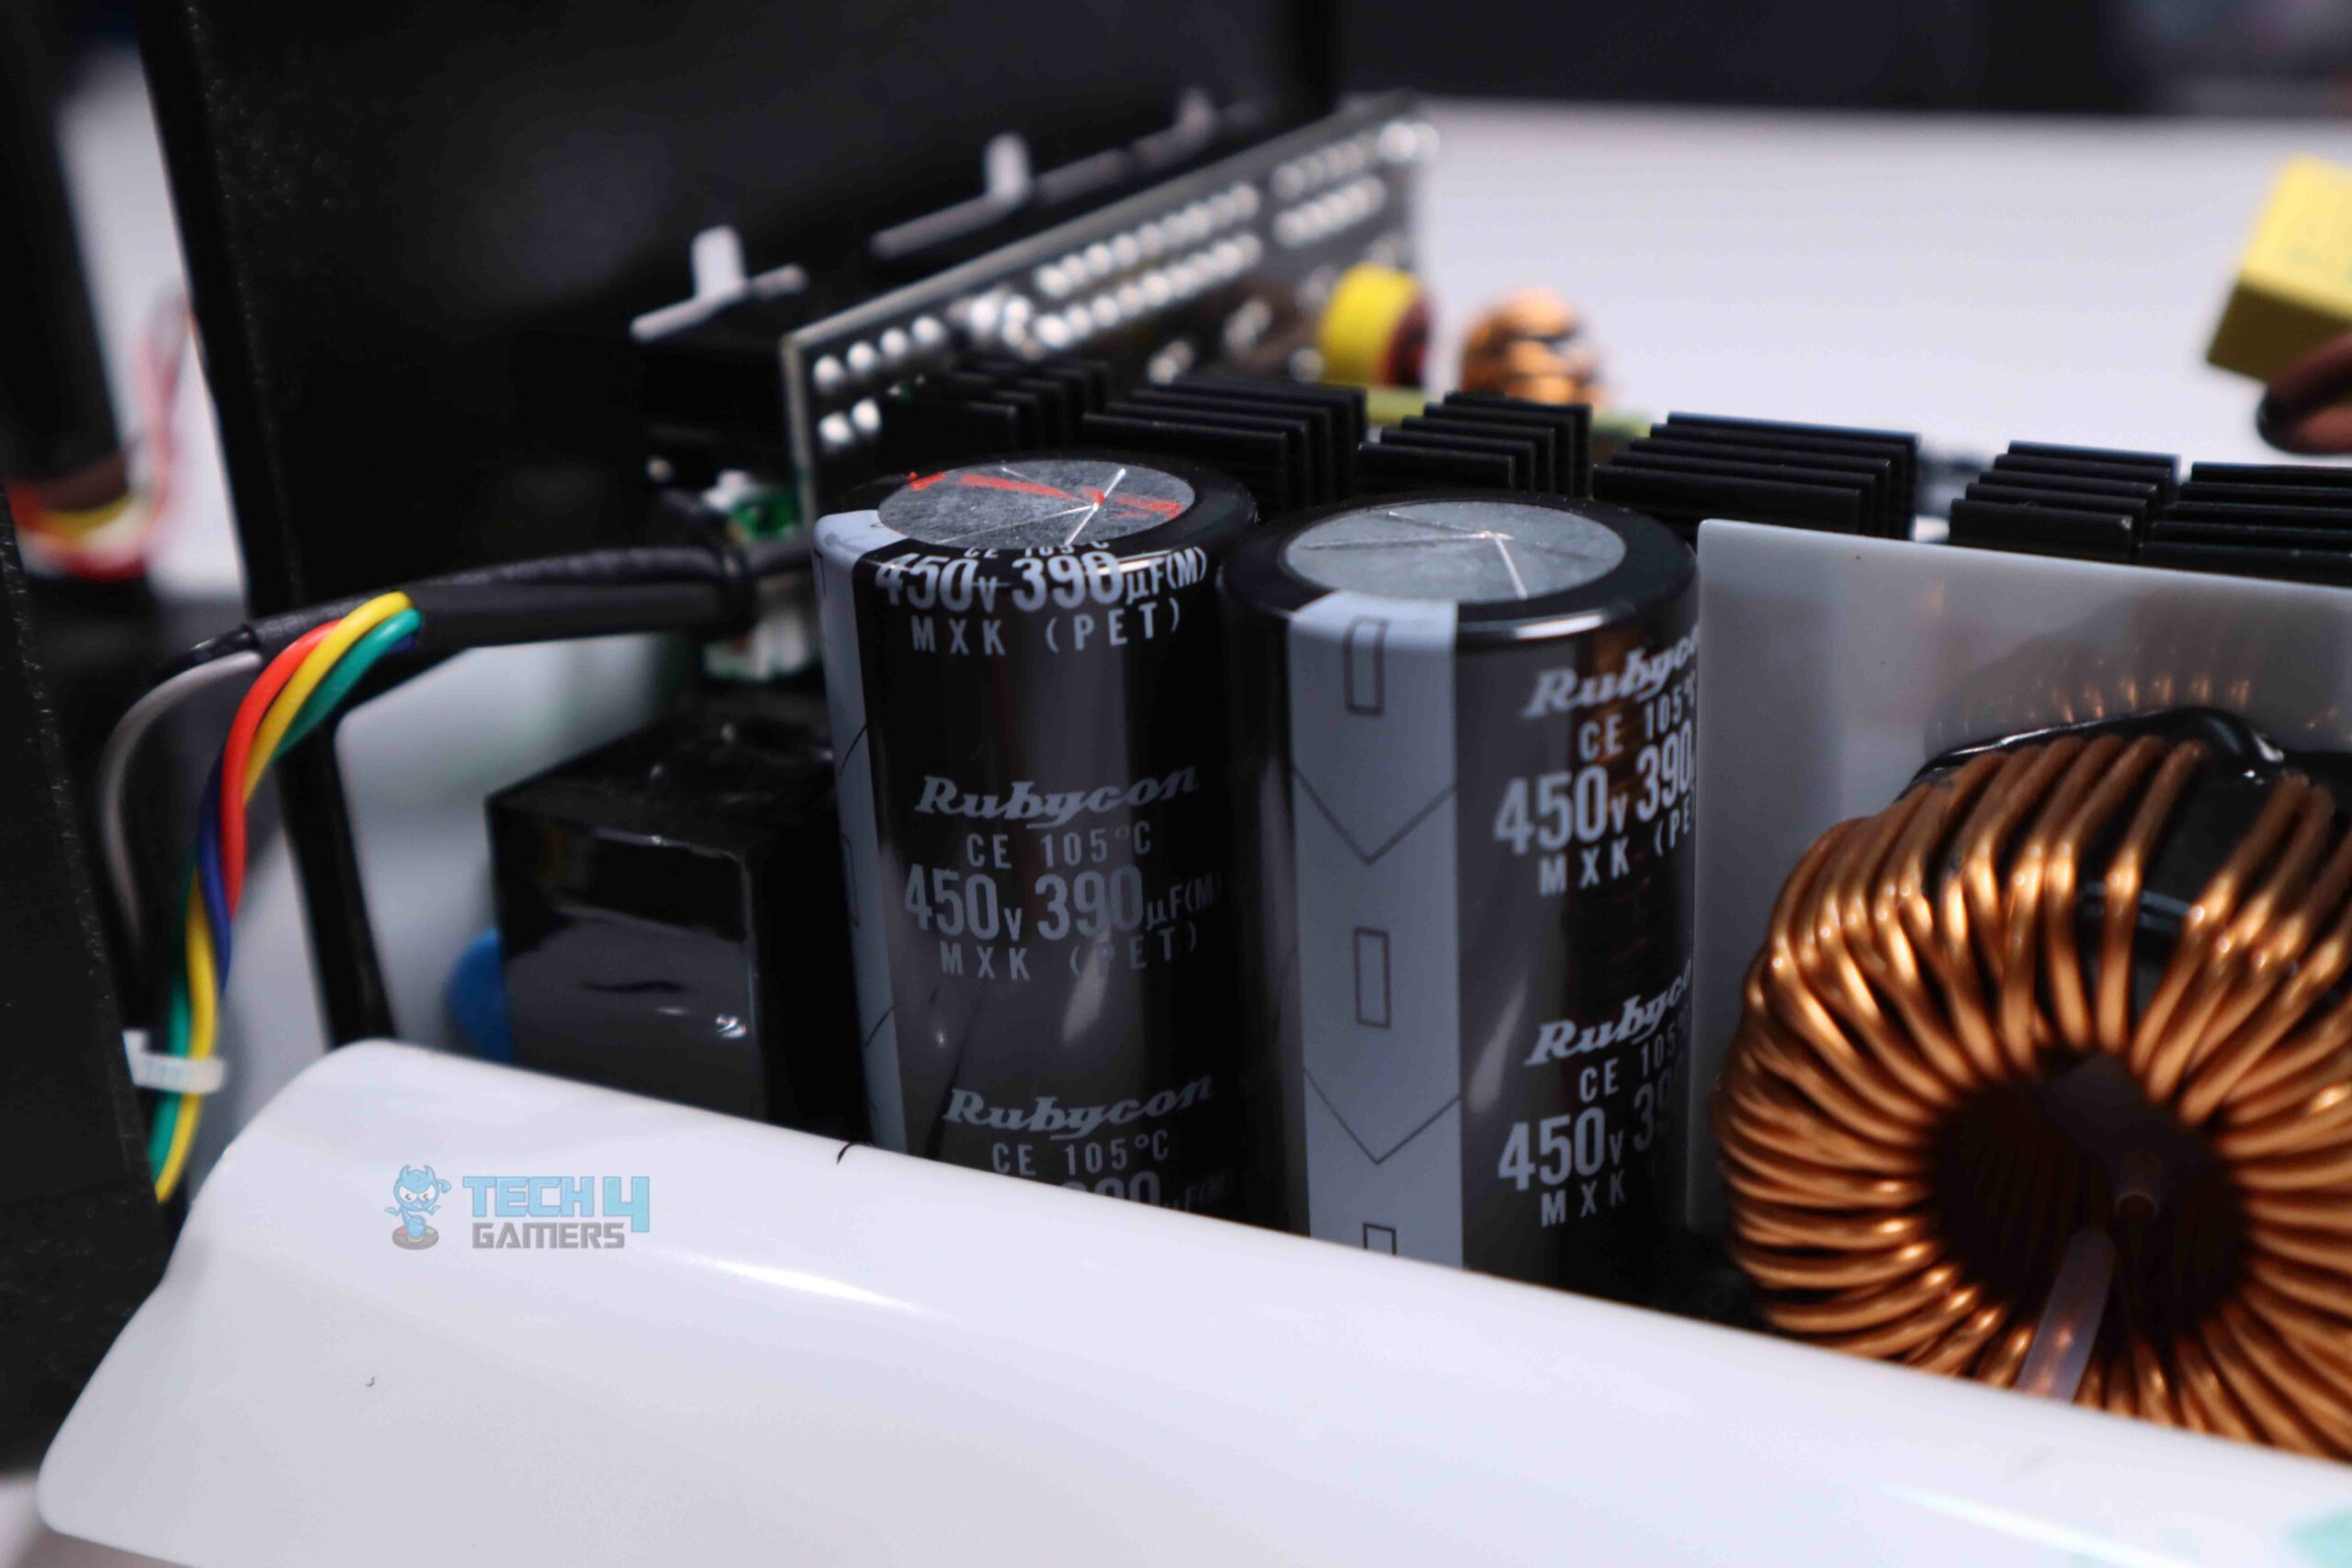 Japanese Capacitors (Image By Tech4Gamers)